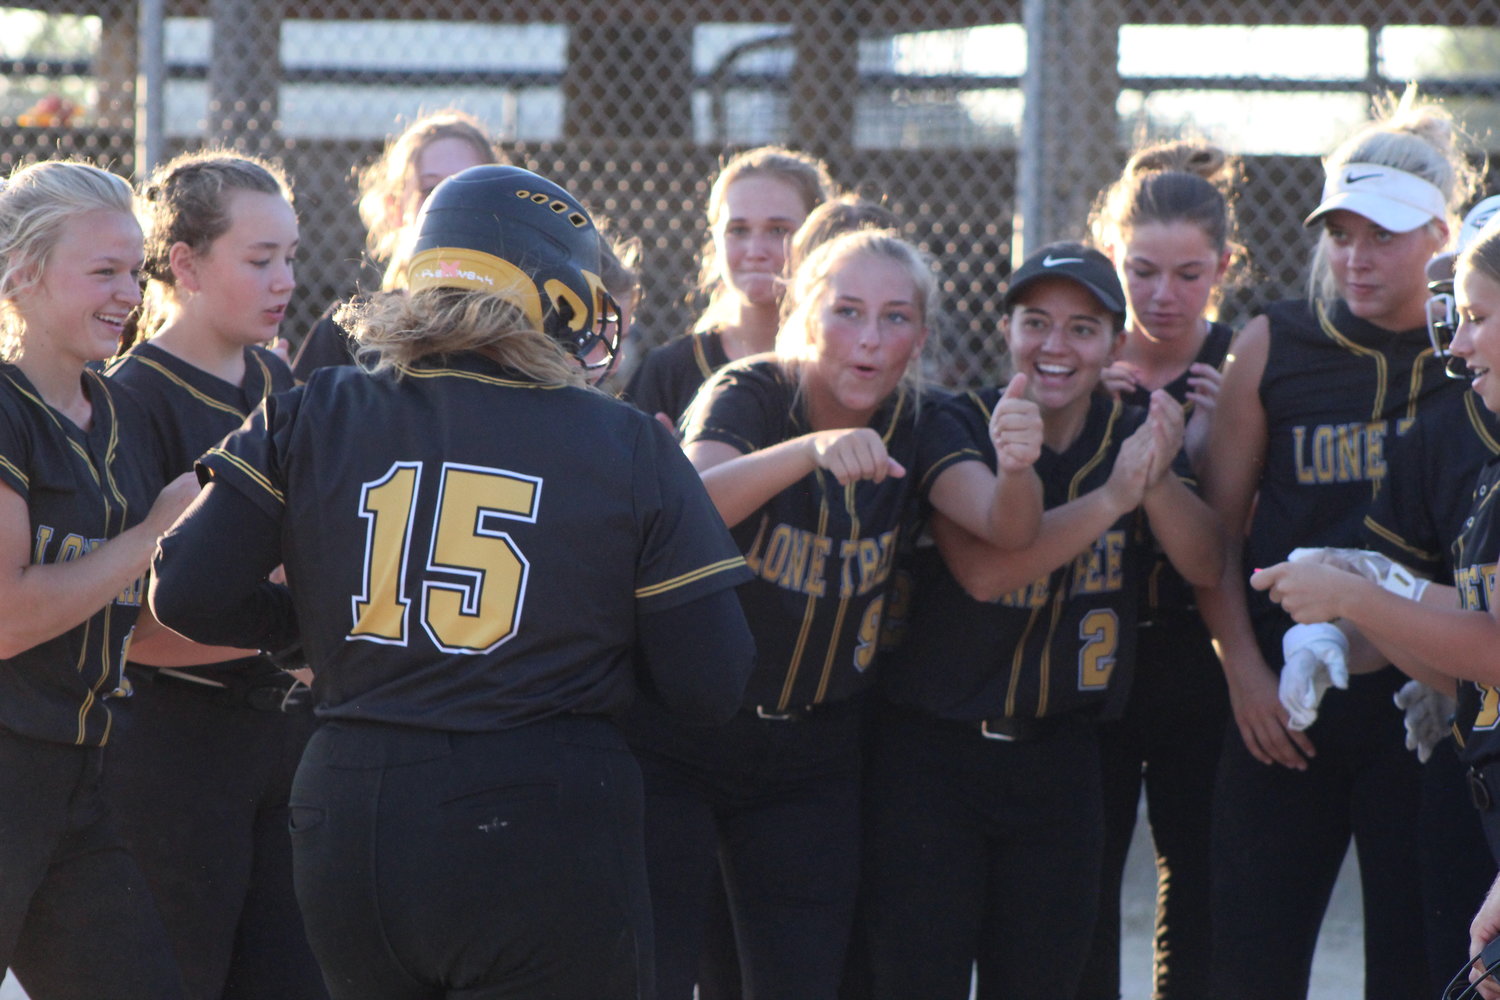 Lone Tree senior Kinley Hayes is greeted by her teammates at home plate after hitting a home run in Friday's game against New London.